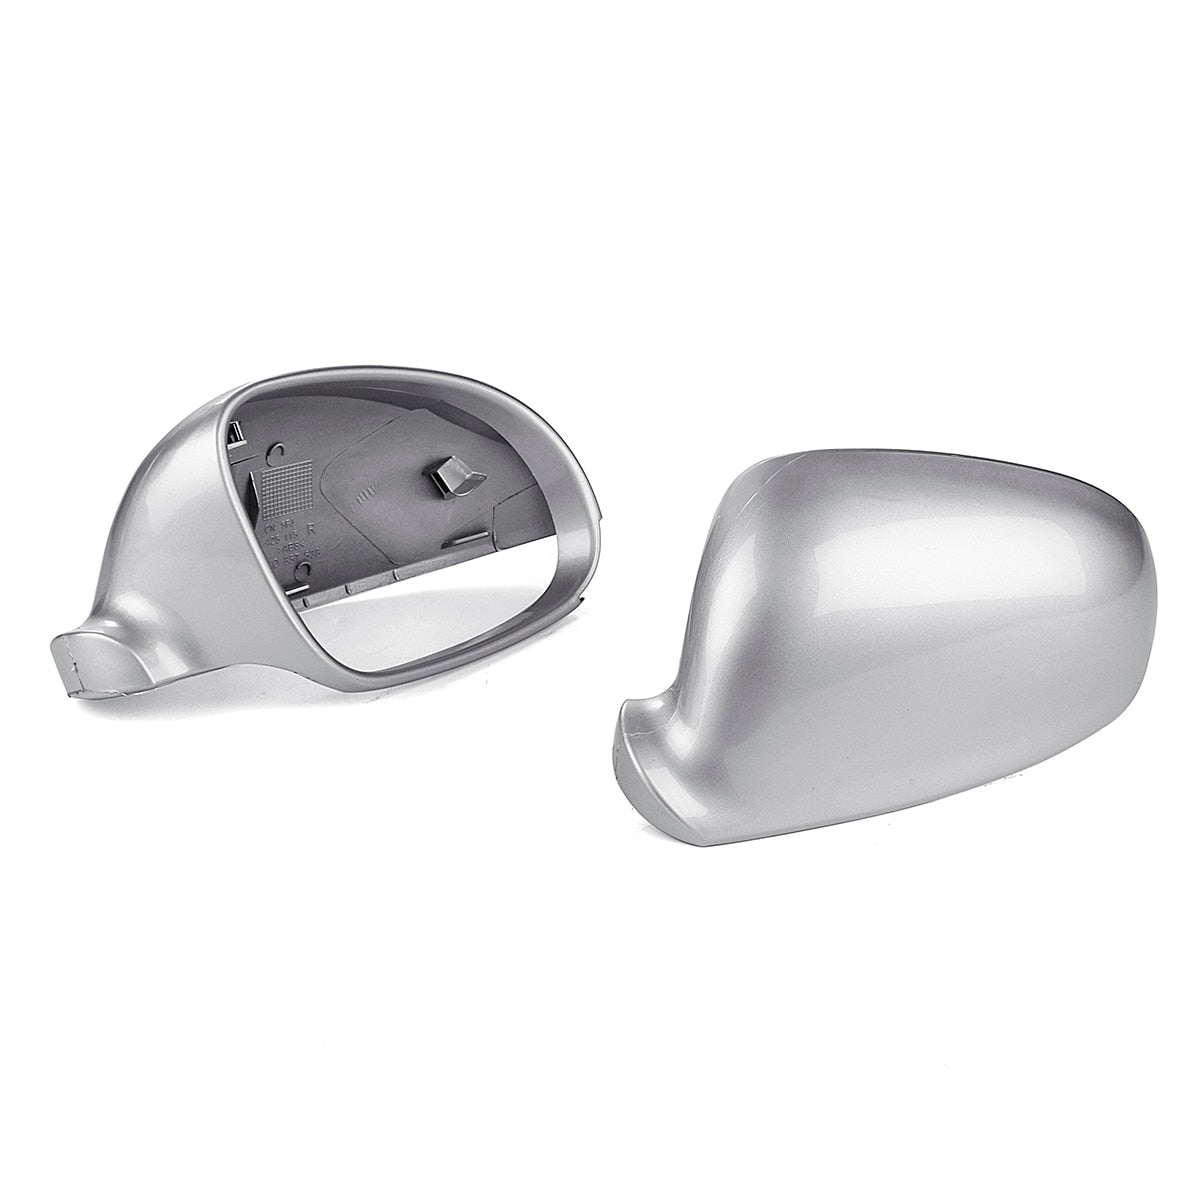 (RIGHT) Rearview Side Wing Mirror Cover Silver Suit For VW Golf Jetta MK5 2003 - 2009